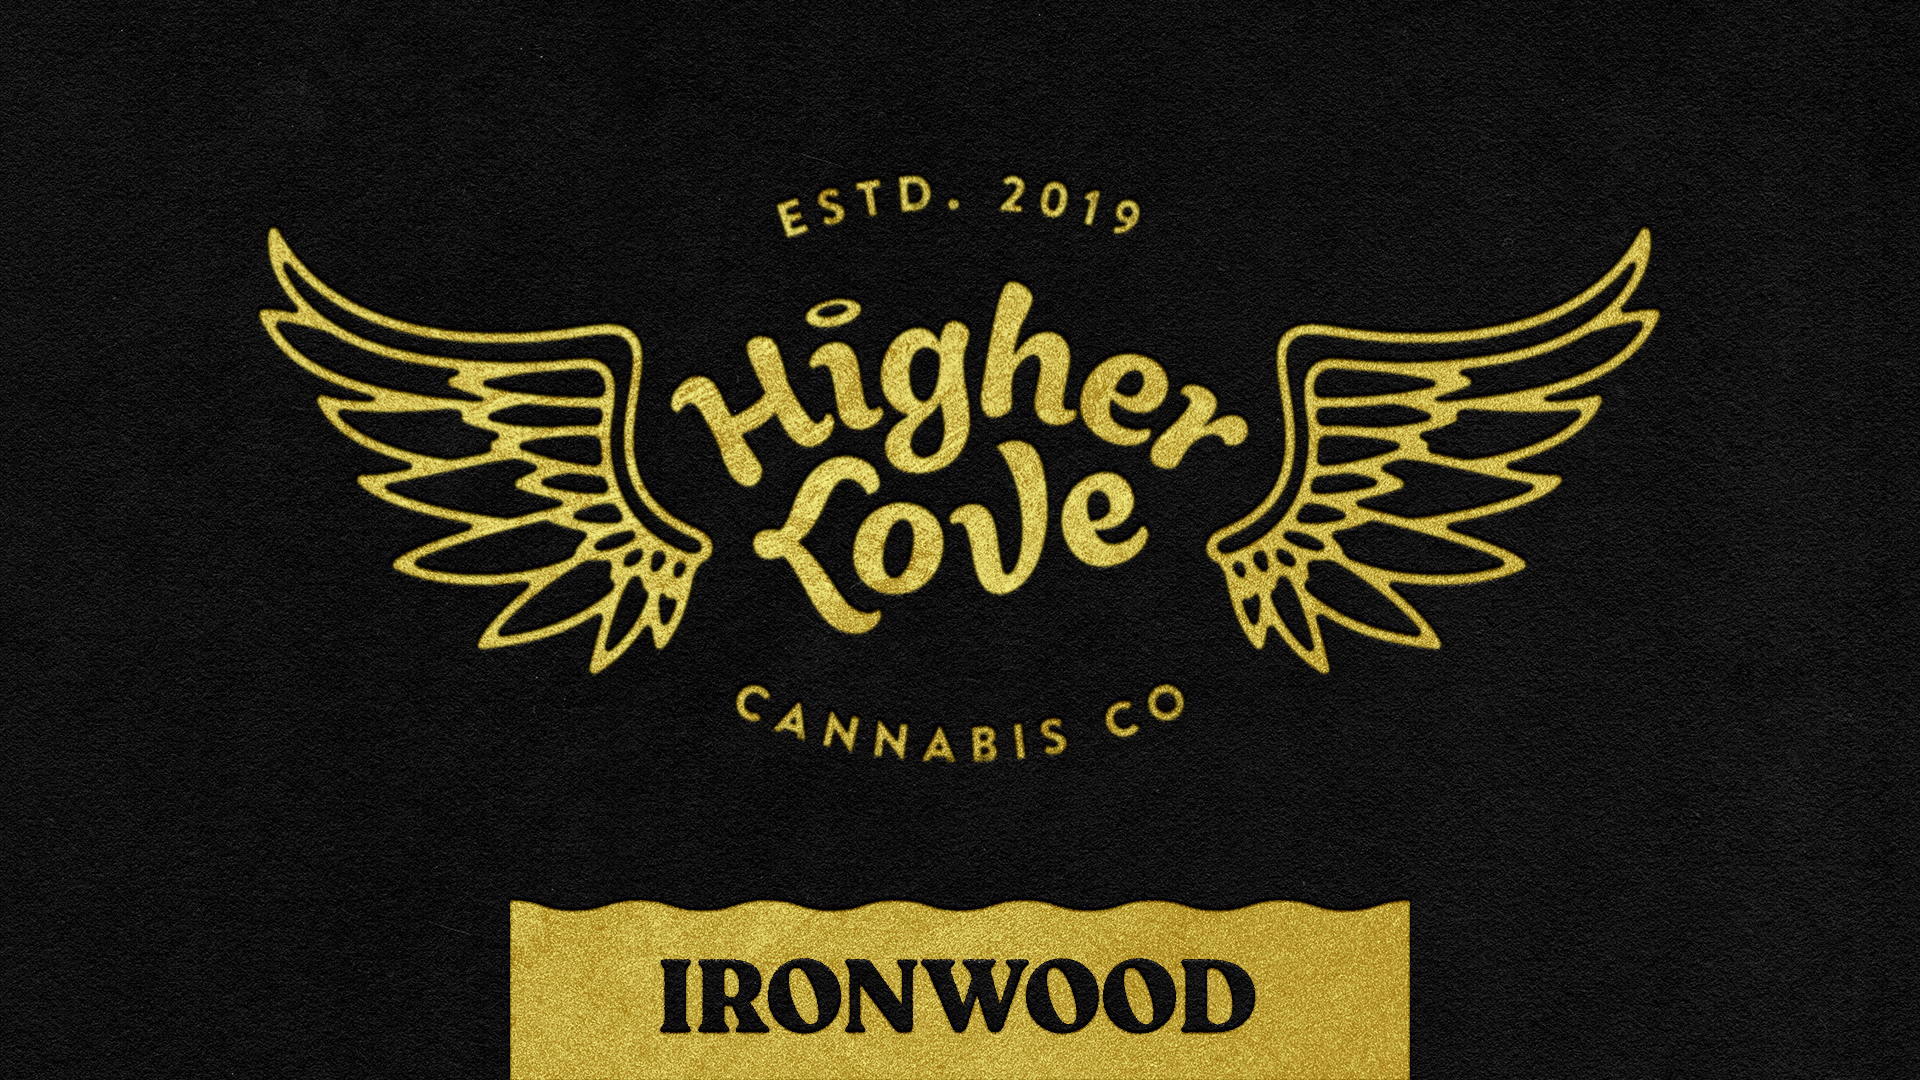 Discover our Ironwood Dispensary for the Best Selection of Cannabis